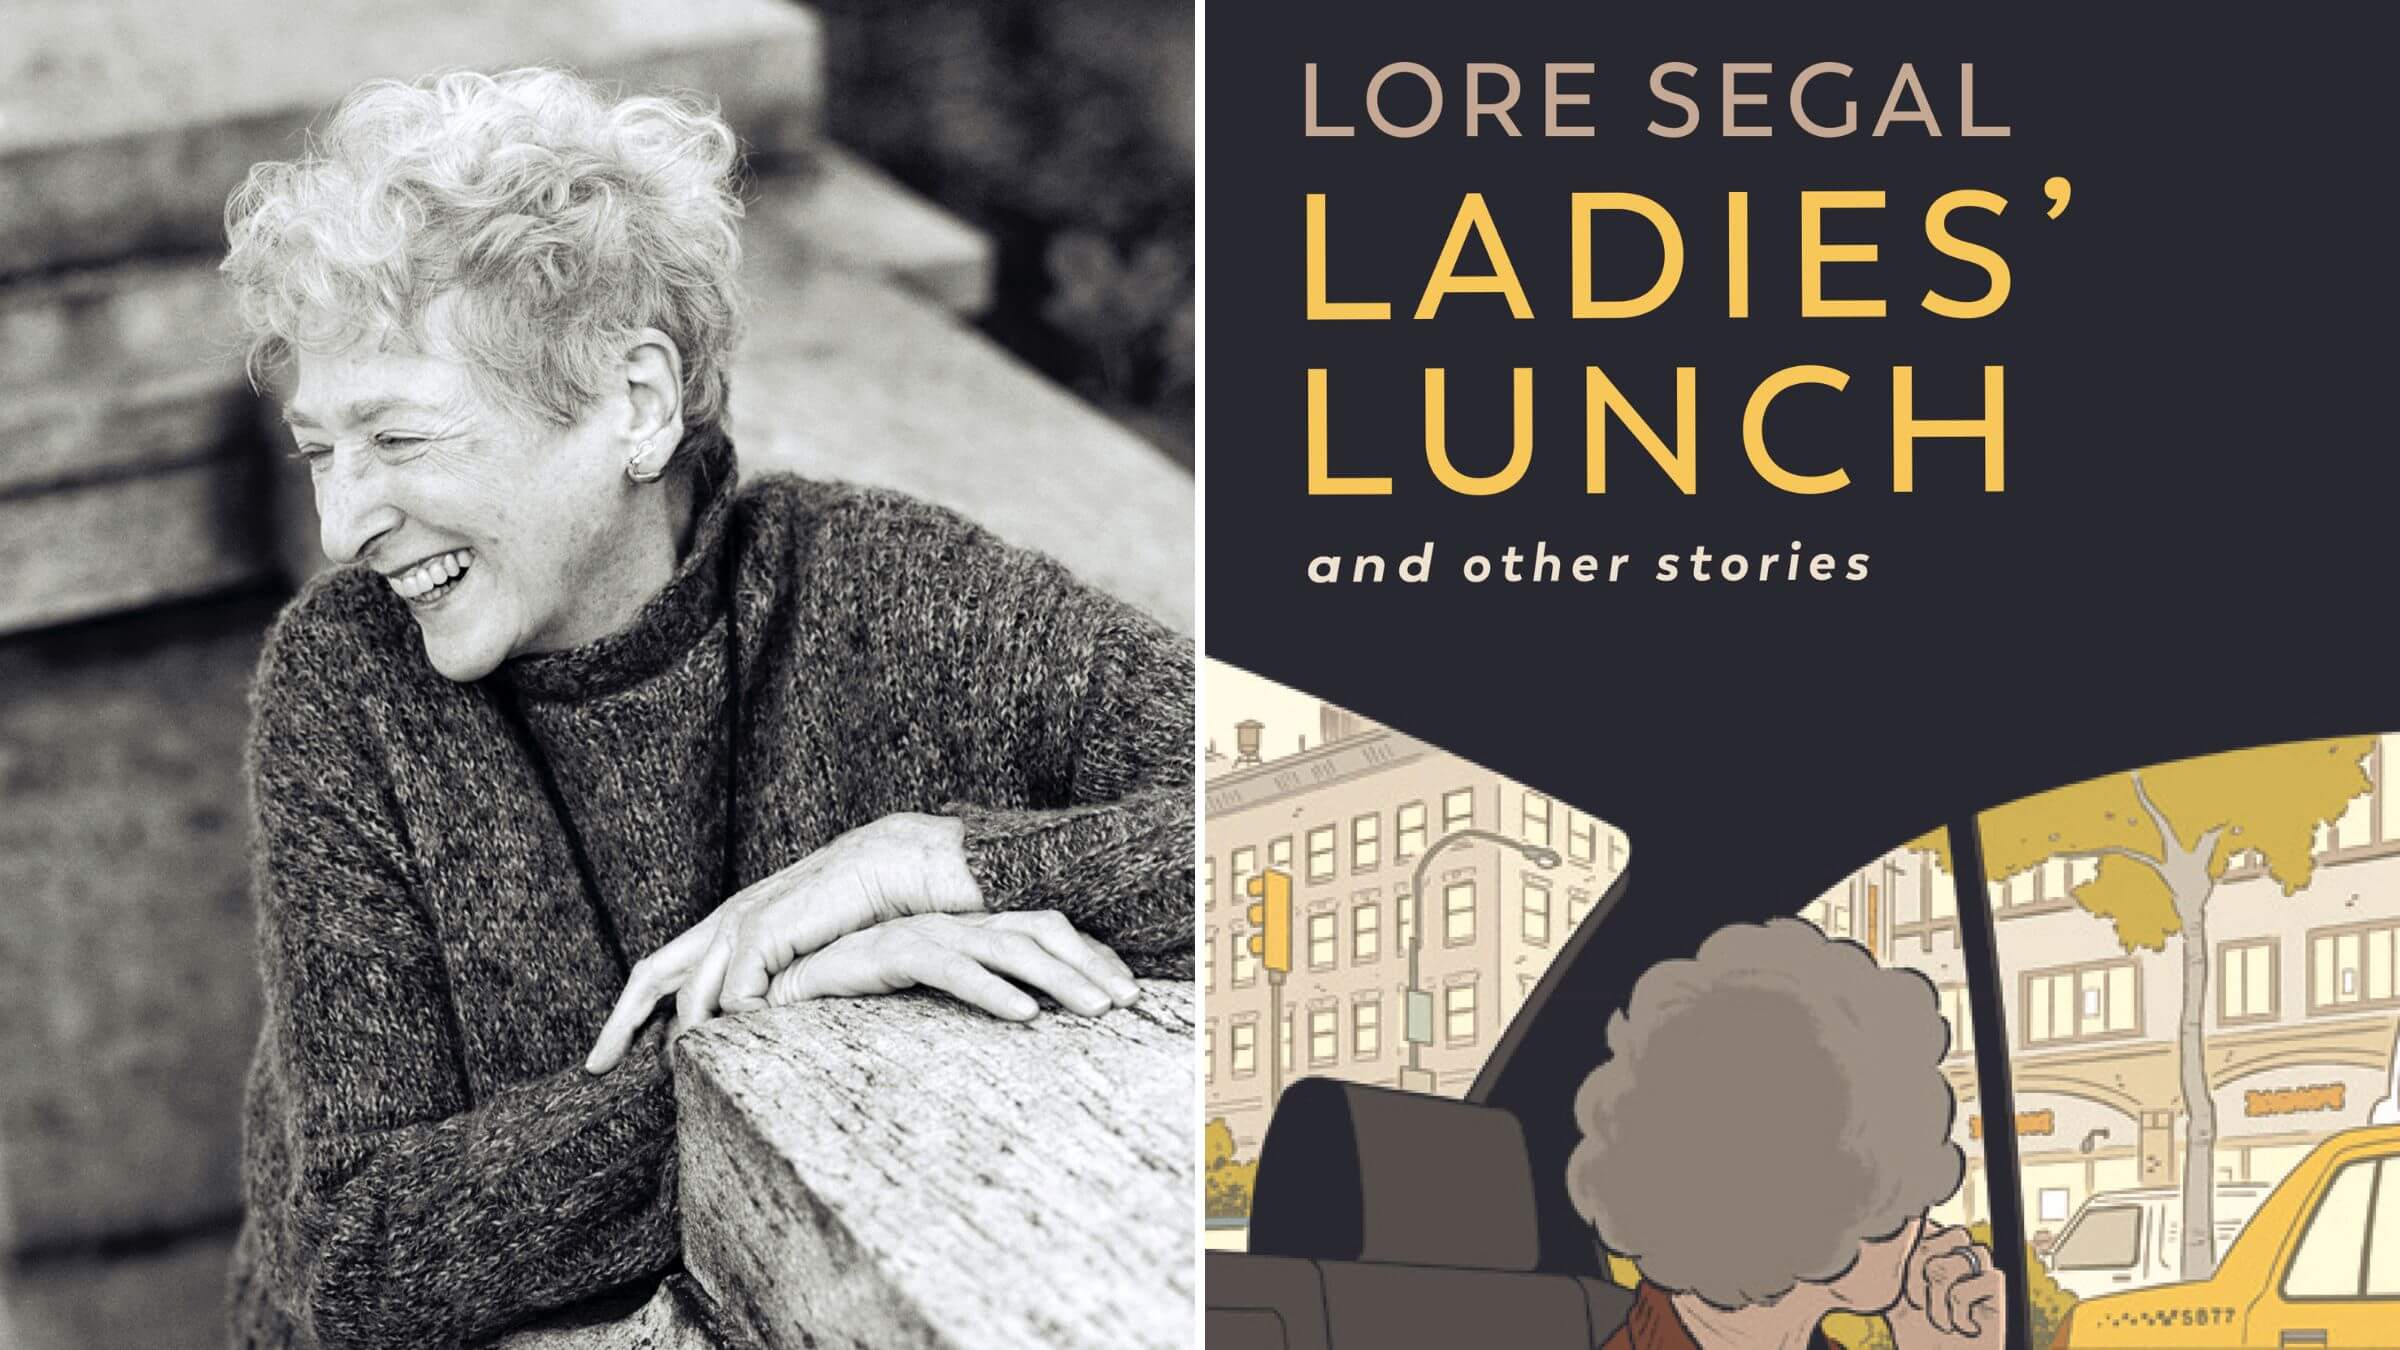 At 95 years old, Lore Segal is one of the oldest working American writers. Her newest collection follows an aging friend group over decades of shared lunches. 